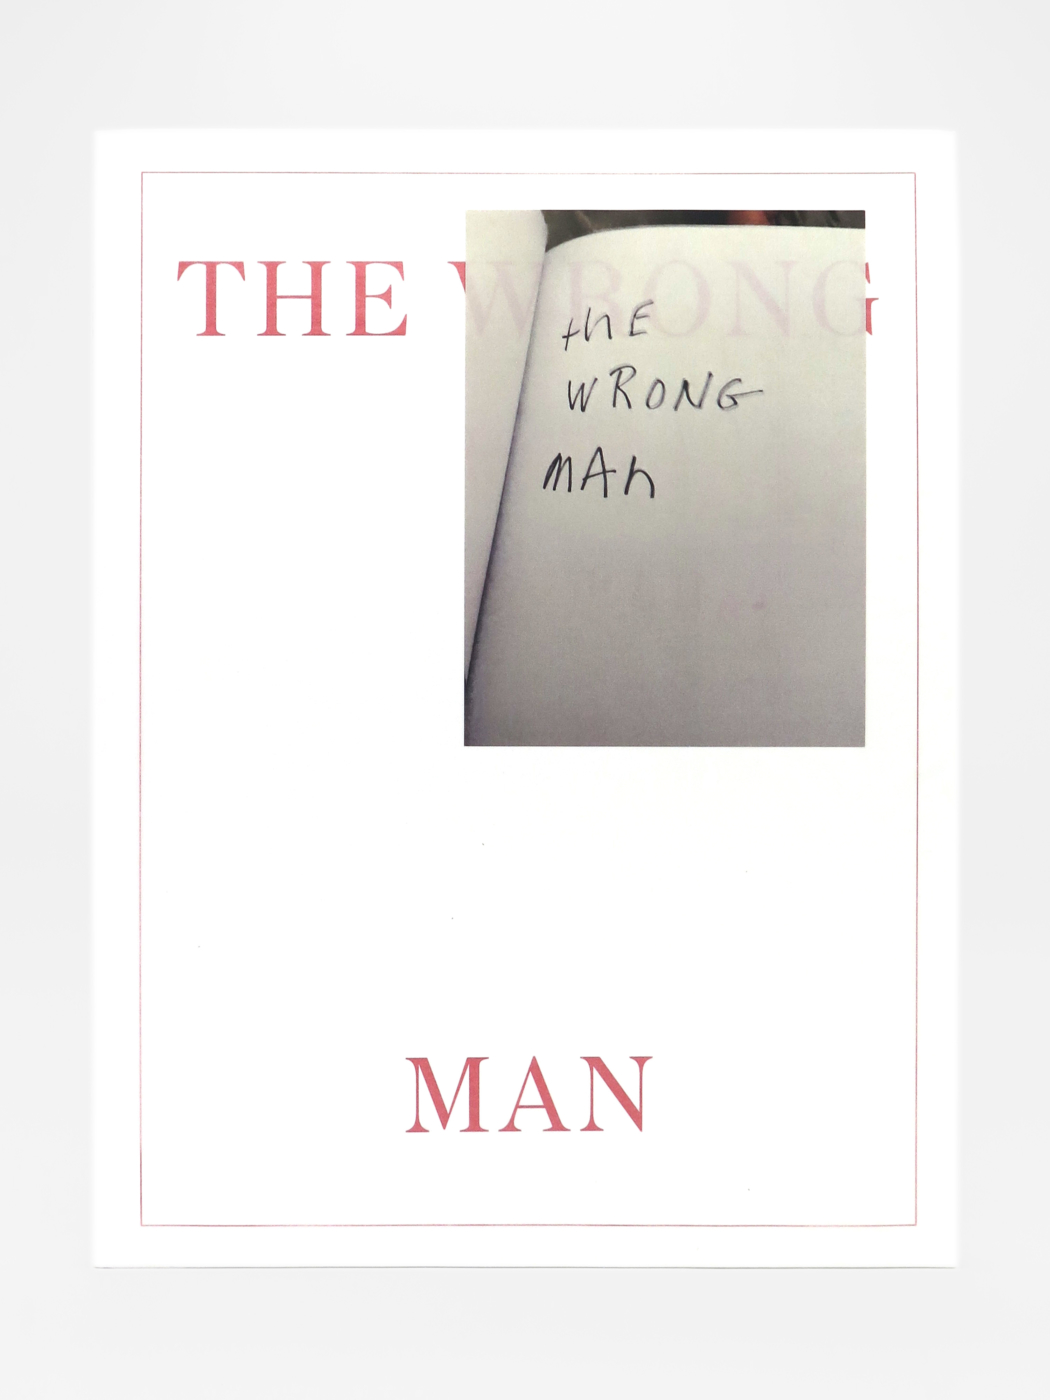 Liza Lacroix, The Wrong Man